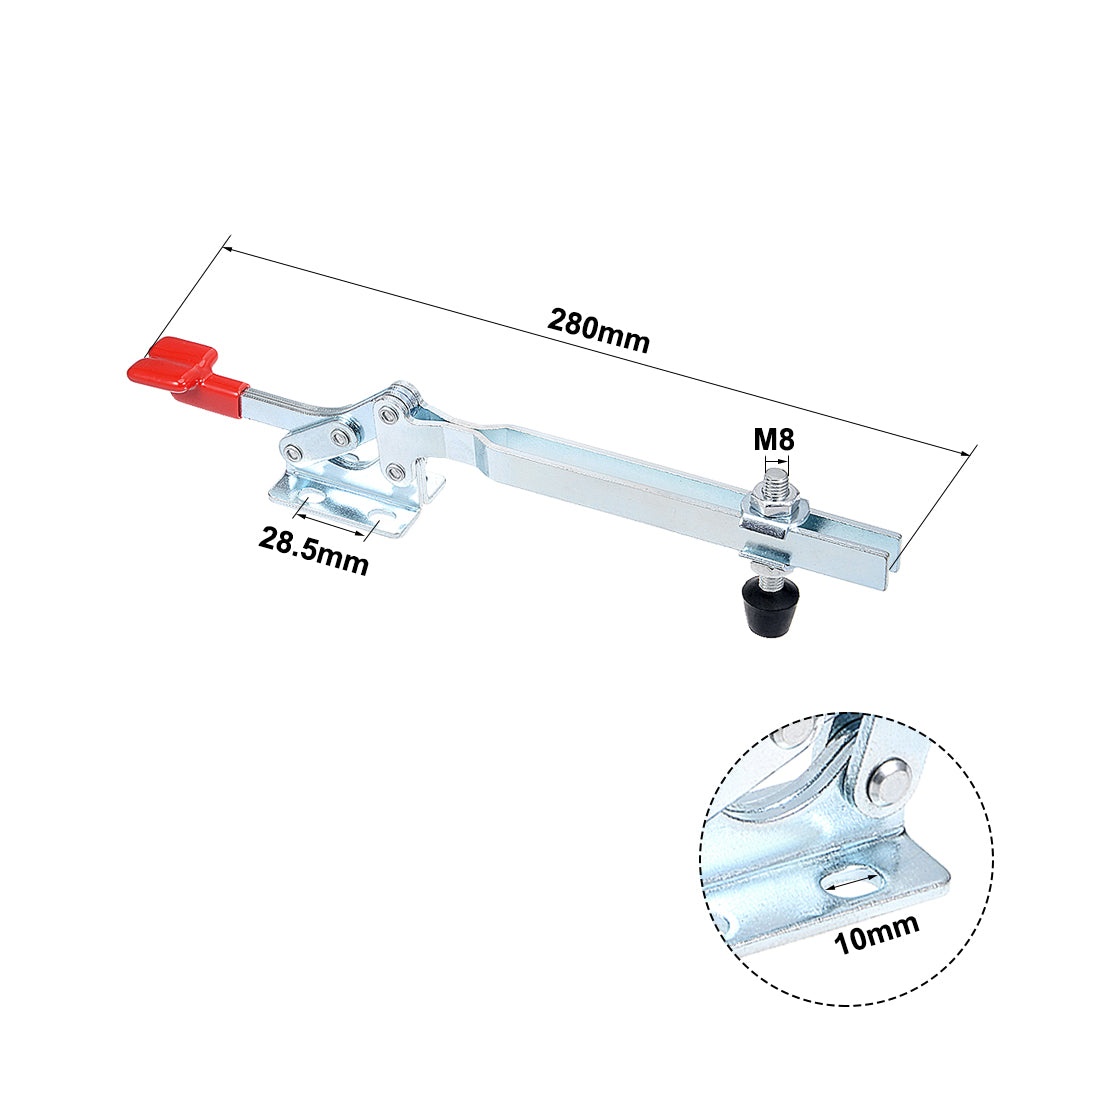 uxcell Uxcell Toggle Clamp GH-22185 Horizontal Clamp Quick Release Tool 250Kg 550lbs Capacity